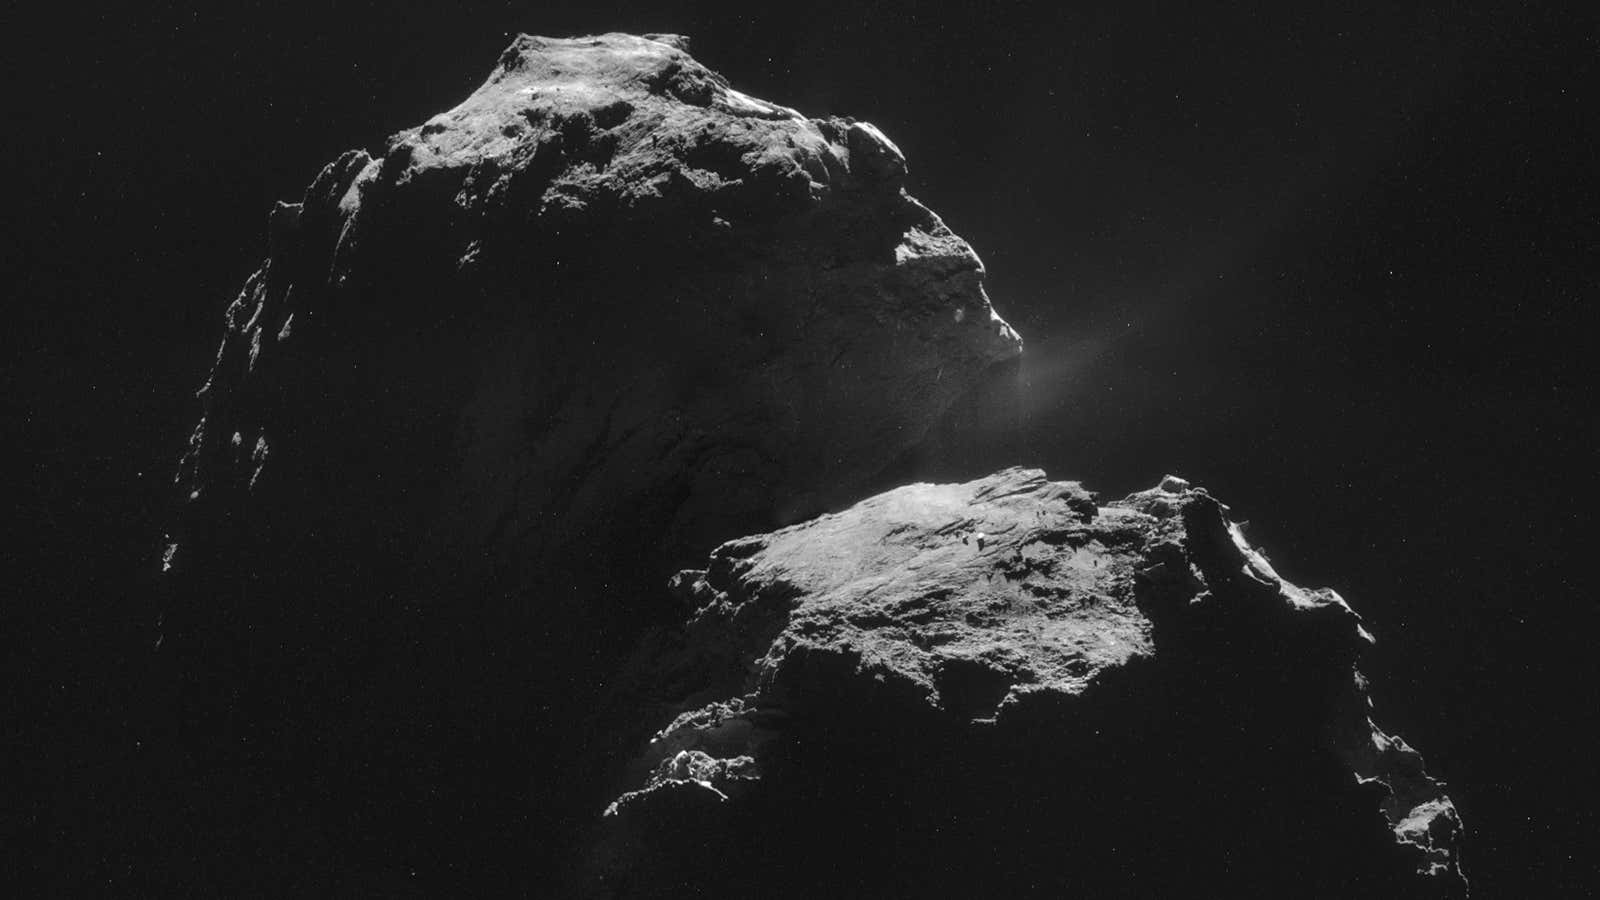 Comet 67P as seen by the satellite Rosetta from 32 kilometers away.